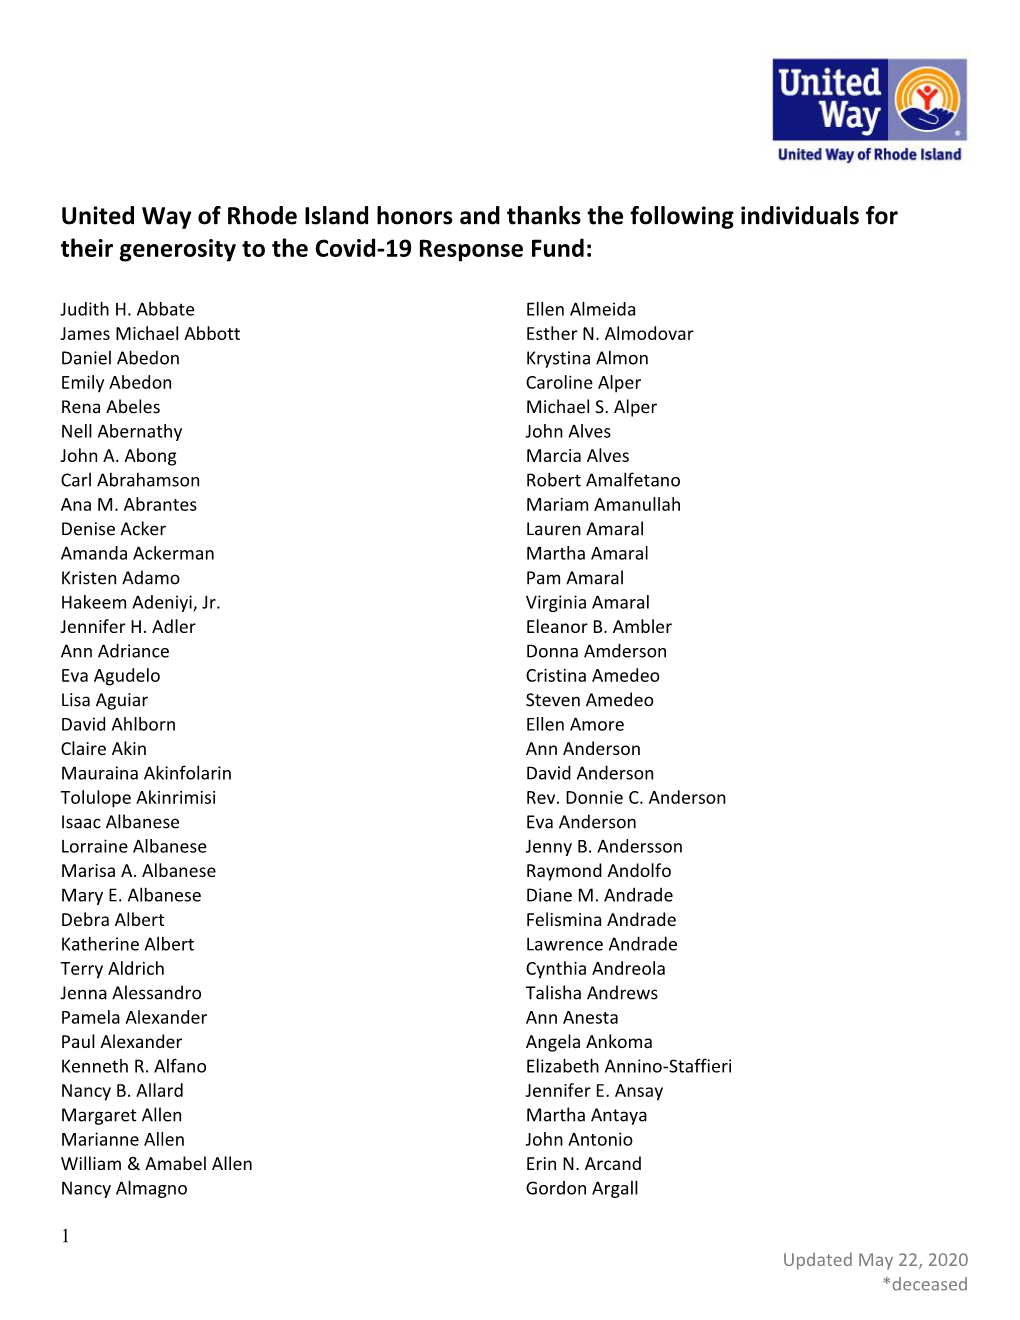 United Way of Rhode Island Honors and Thanks the Following Individuals for Their Generosity to the Covid-19 Response Fund